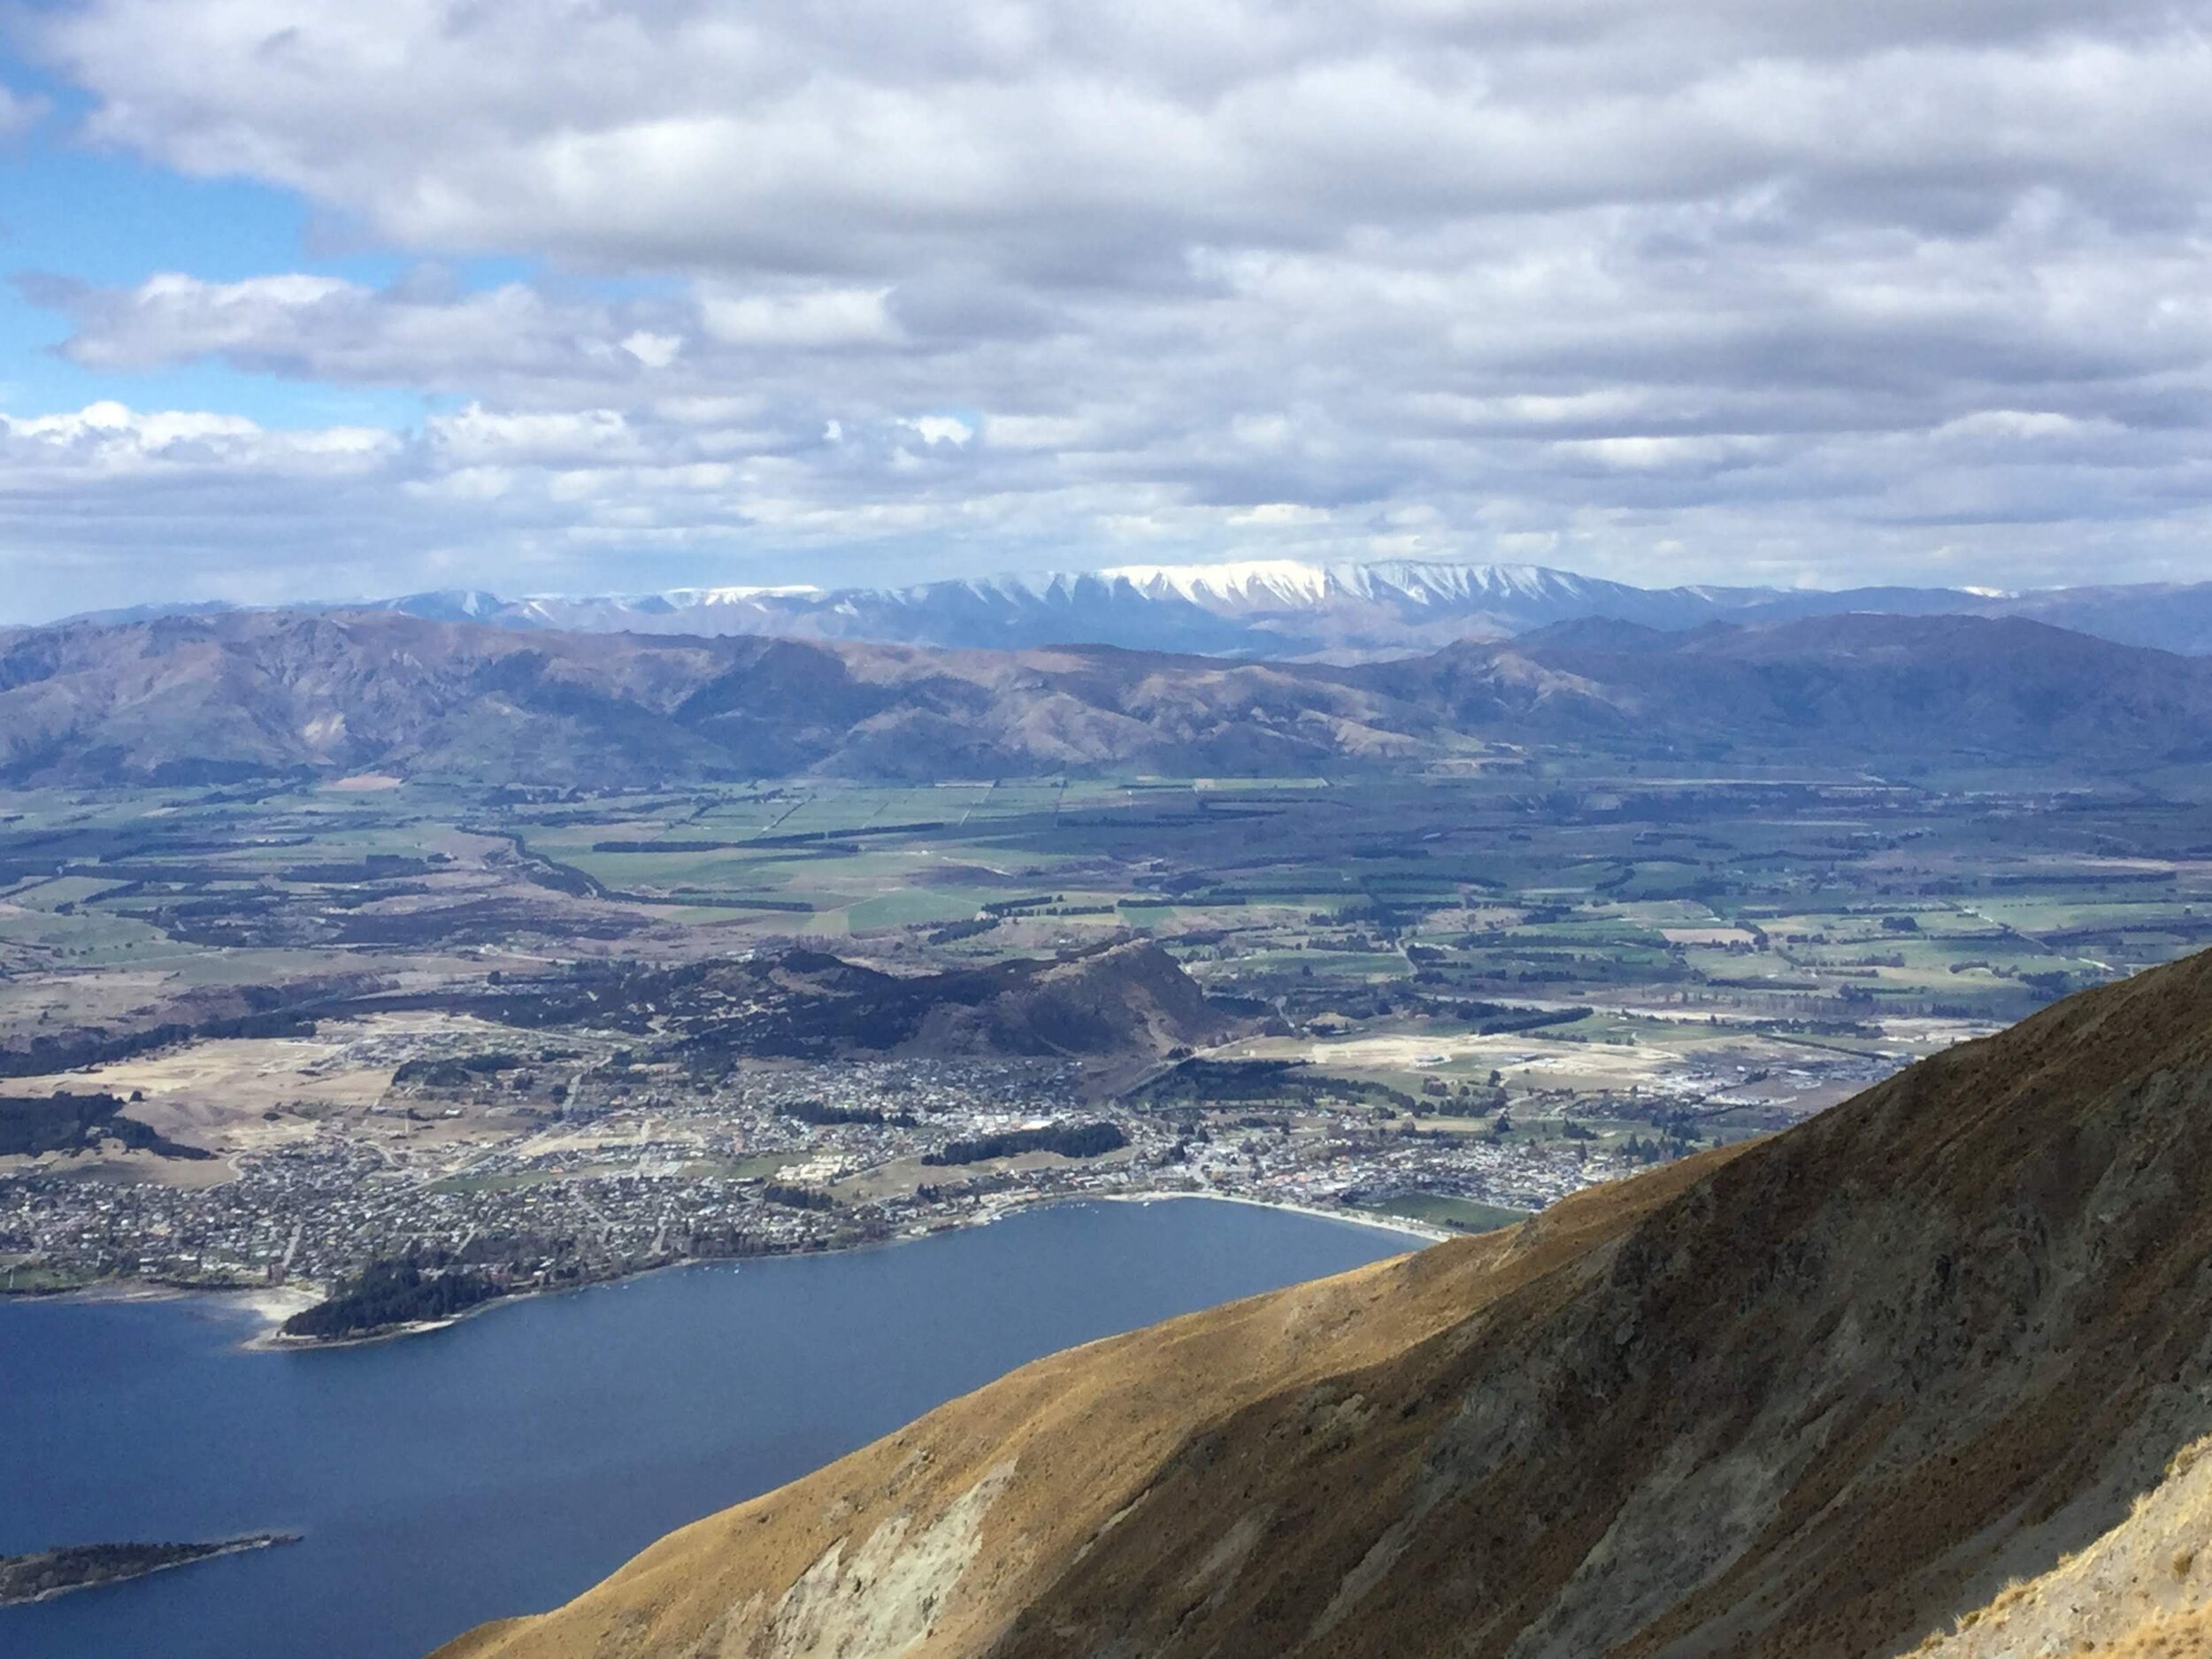 Wanaka and the Whole Valley Behind It